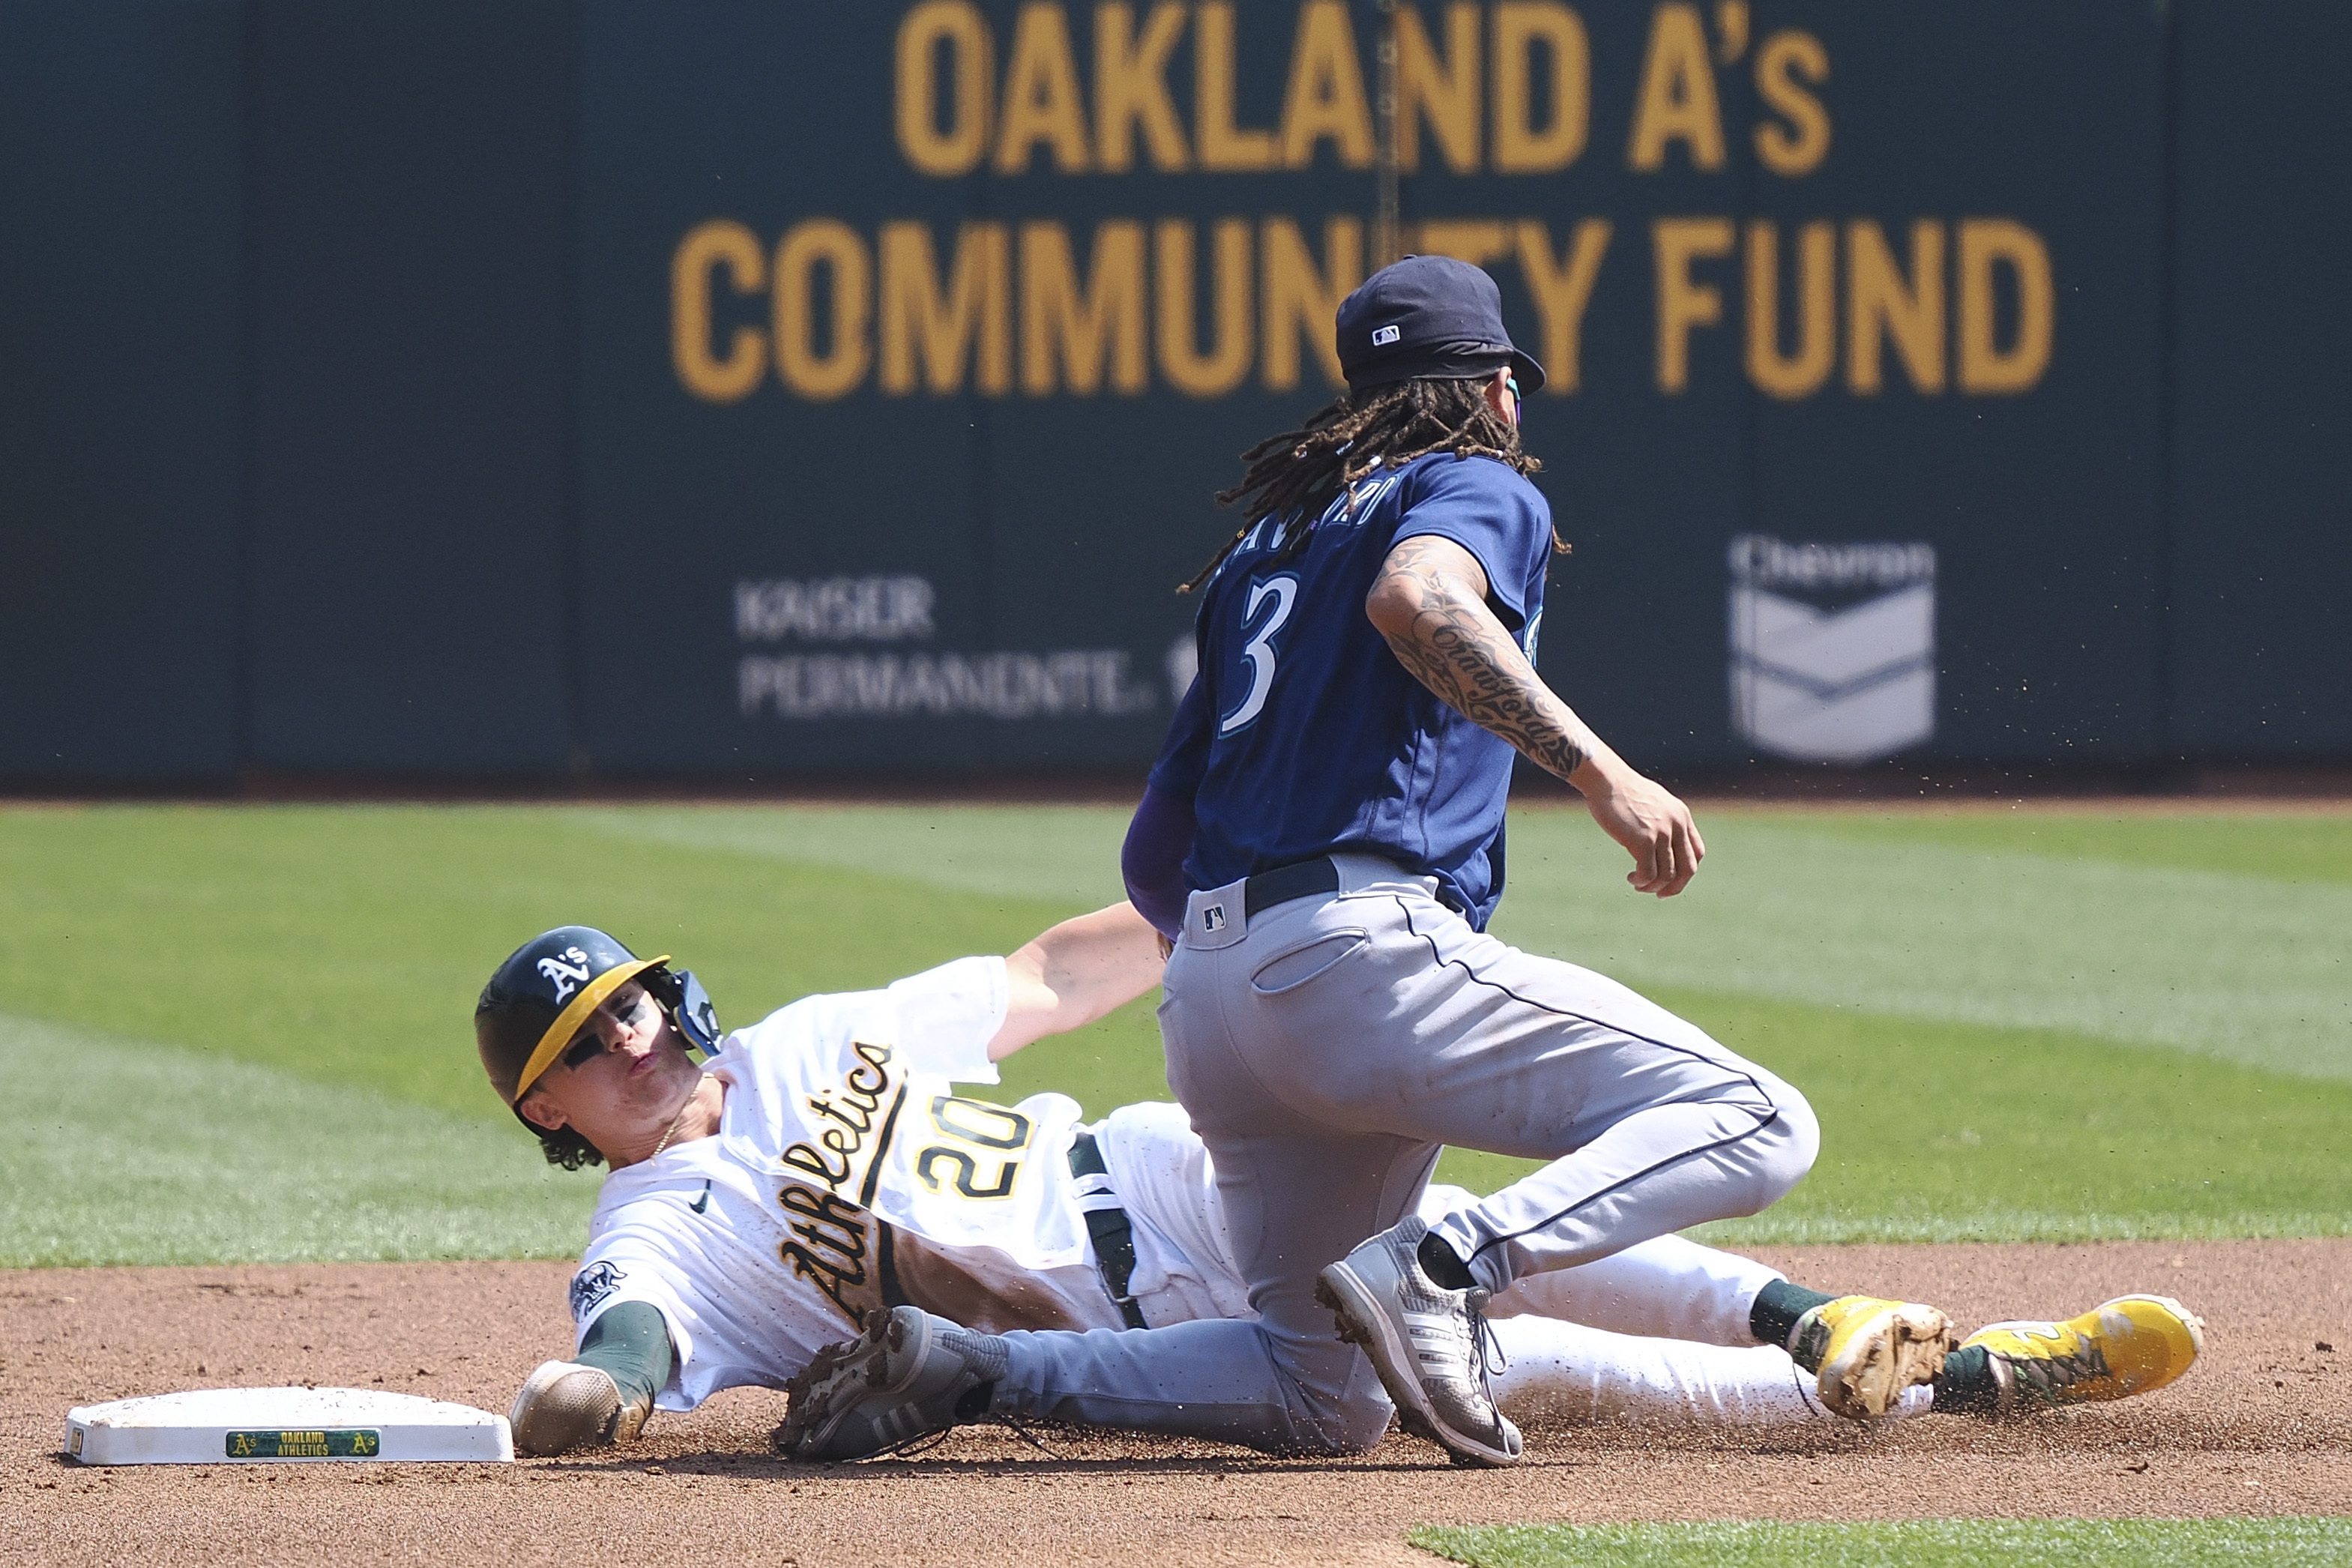 Mariners score 4 in 11th to earn 6-3 win over Astros